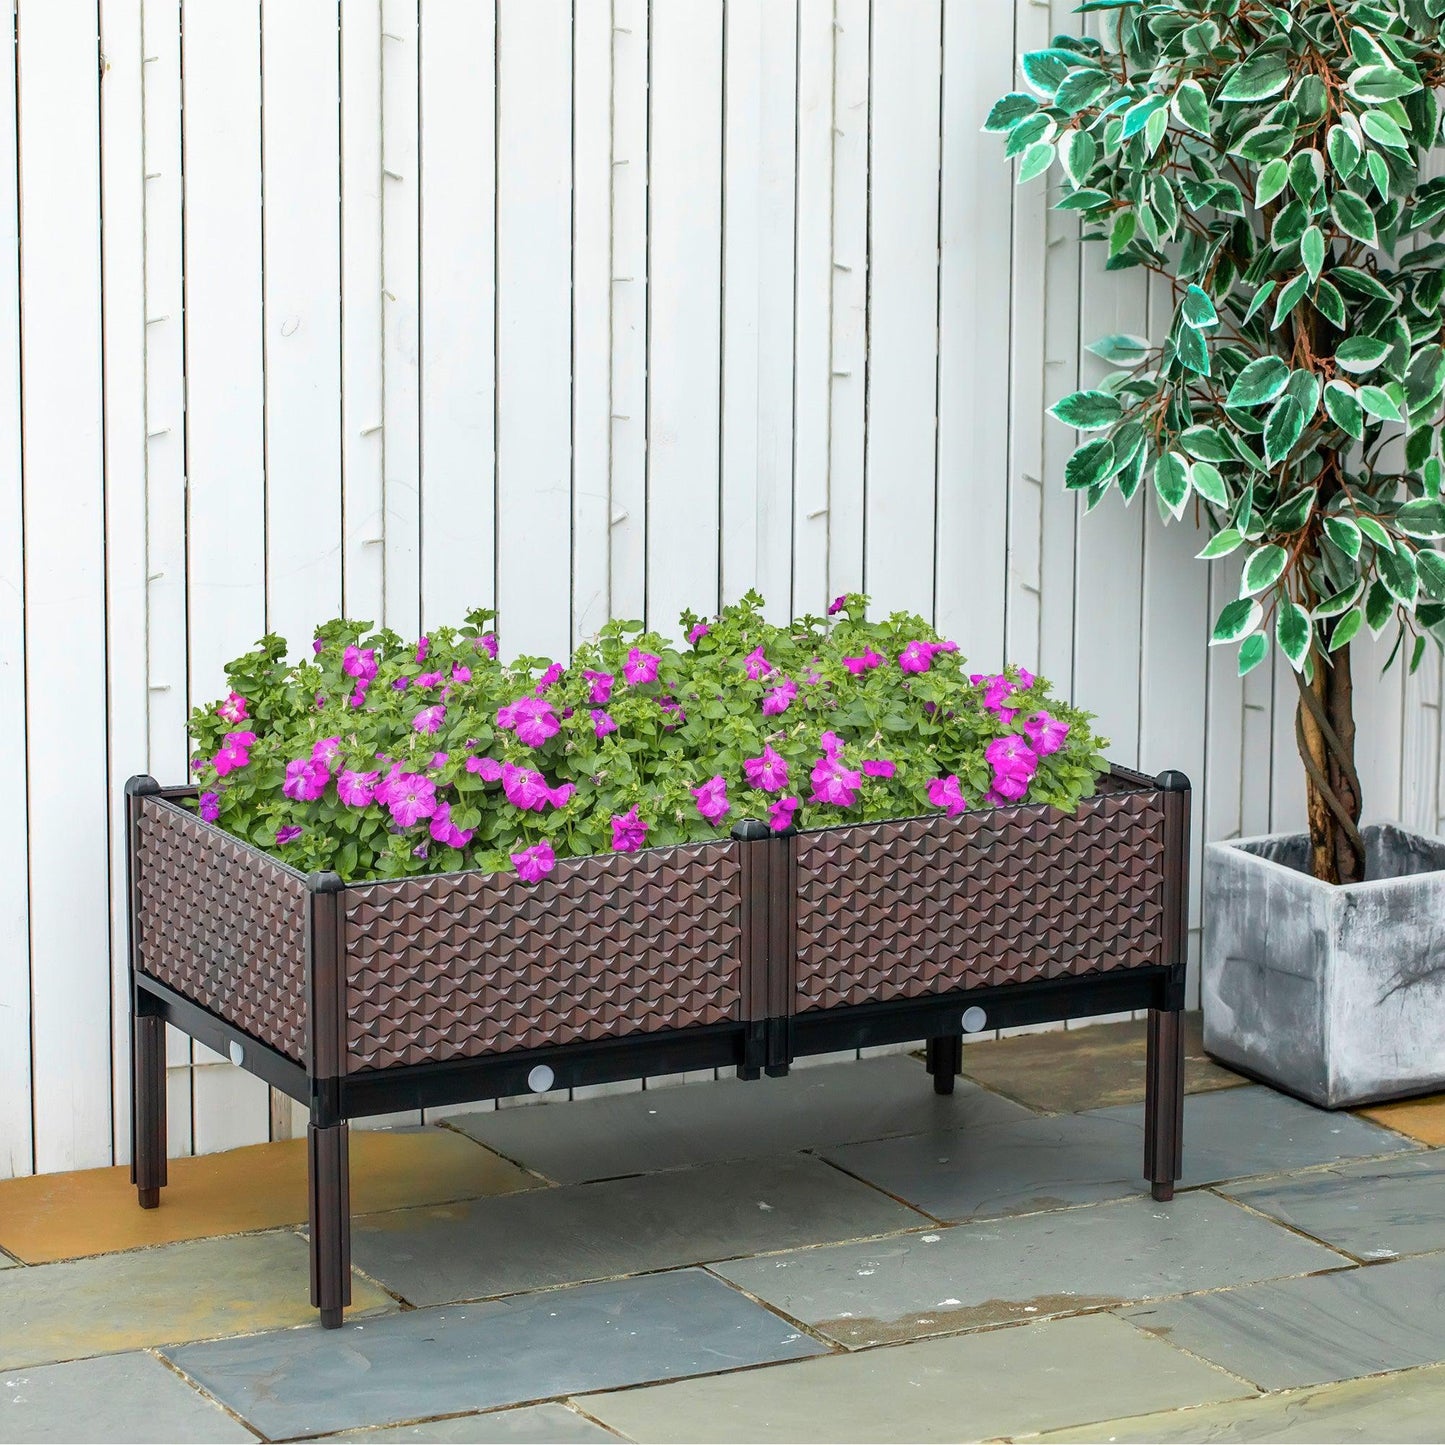 Outsunny 2-Pack Elevated Garden Bed - Self-Watering, 50cm - ALL4U RETAILER LTD